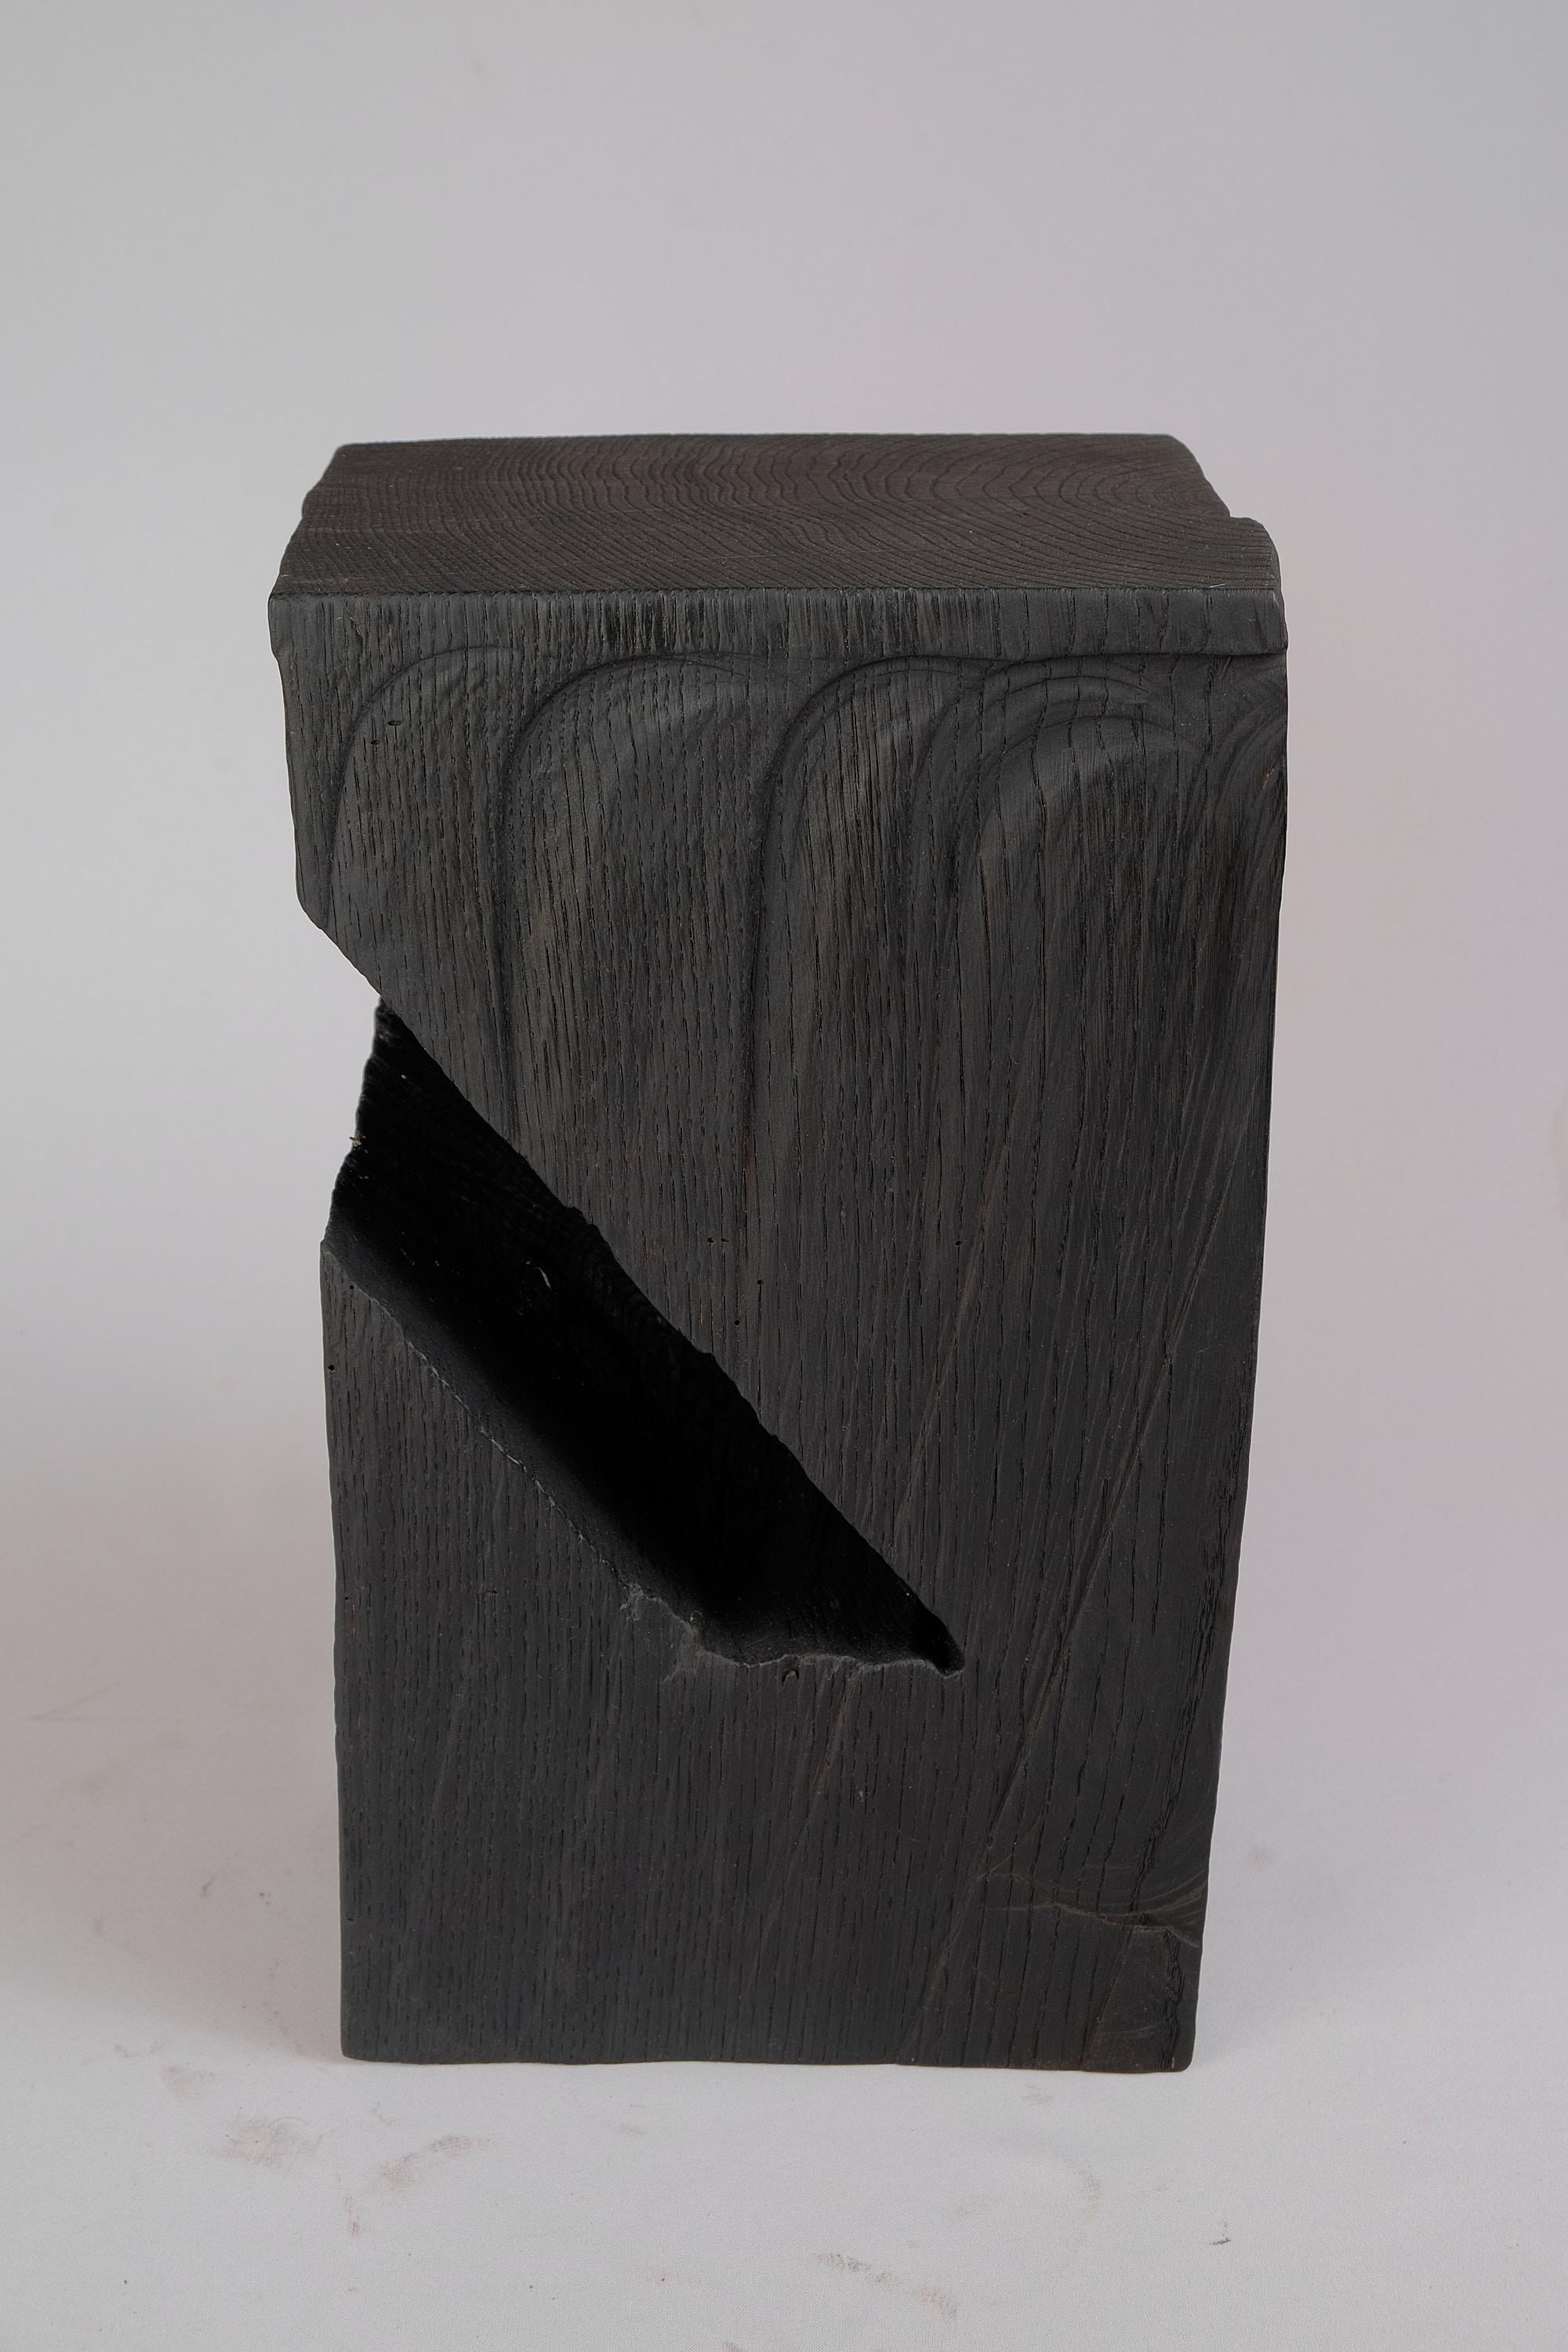 Solid Burnt Wood, Side Table, Stool, Original Contemporary Design For Sale 2